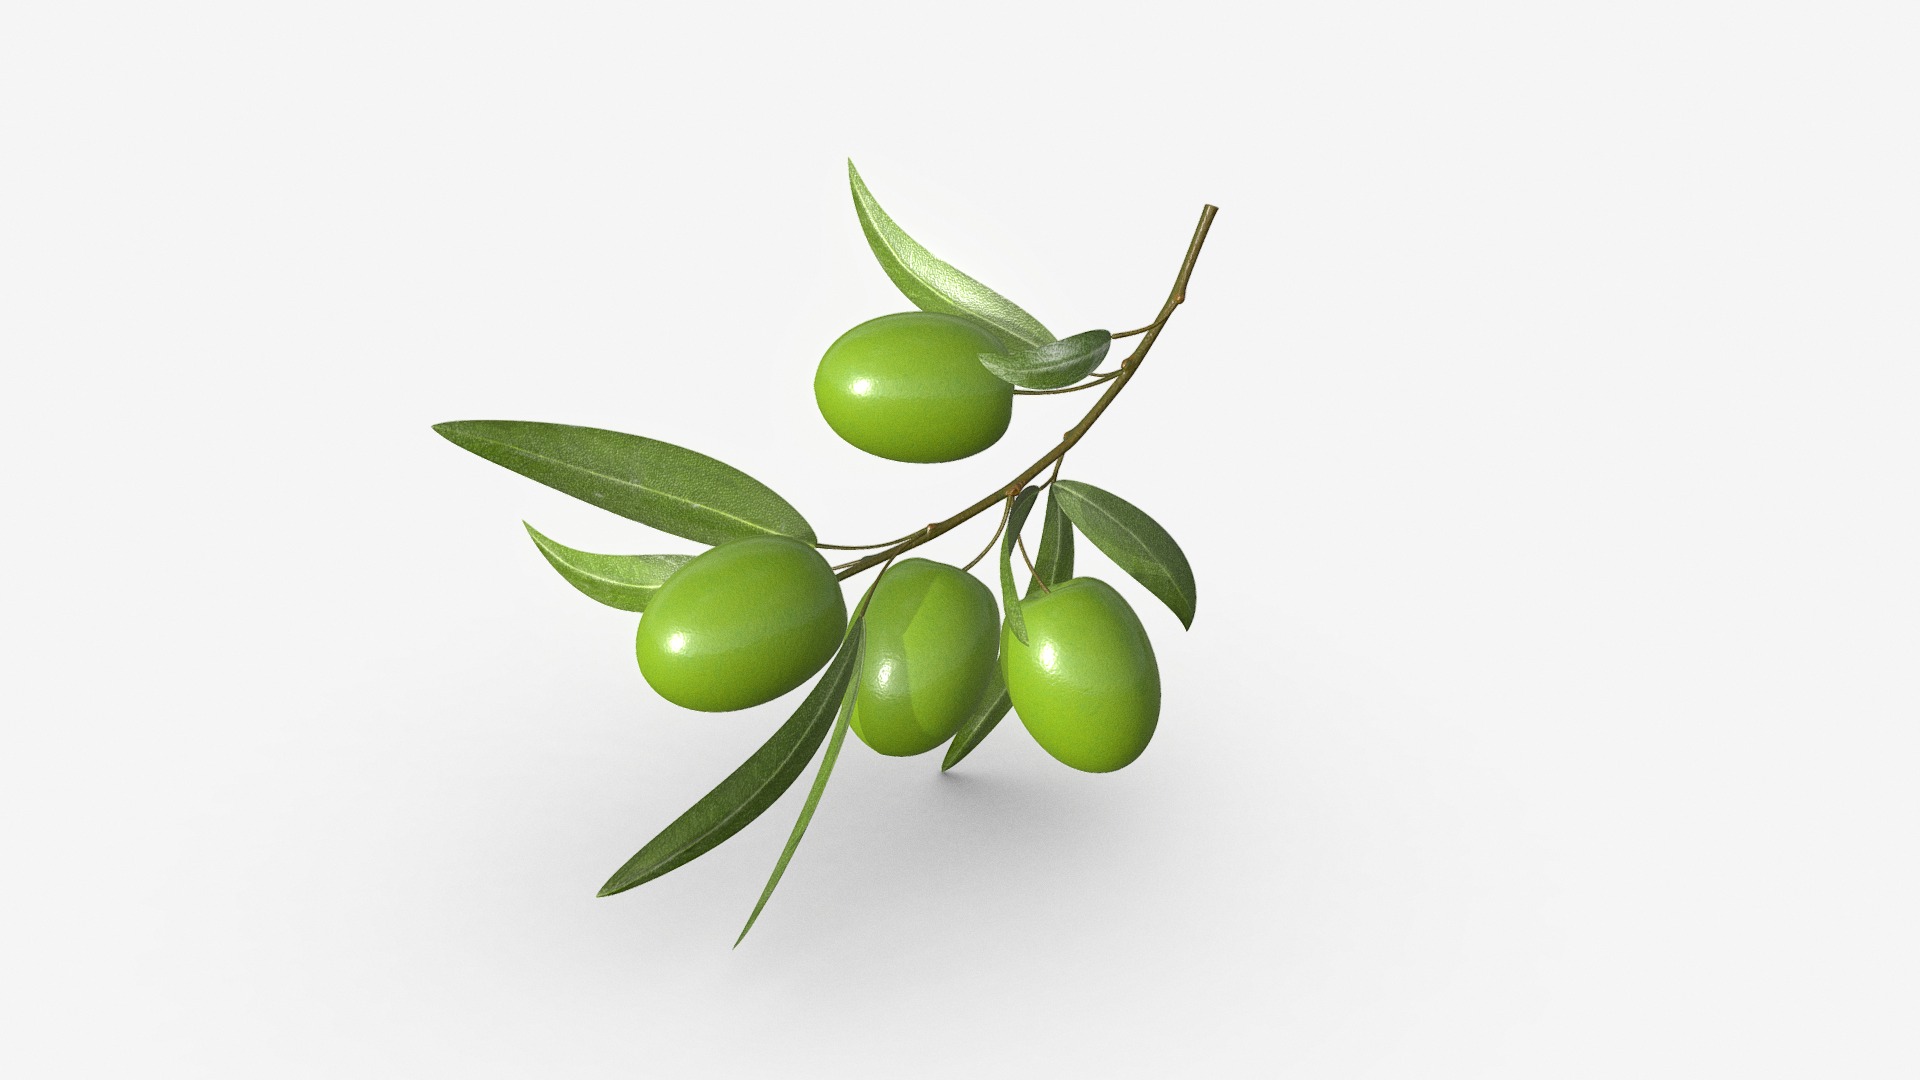 3D model olive branch - This is a 3D model of the olive branch. The 3D model is about a branch with green fruits on it.